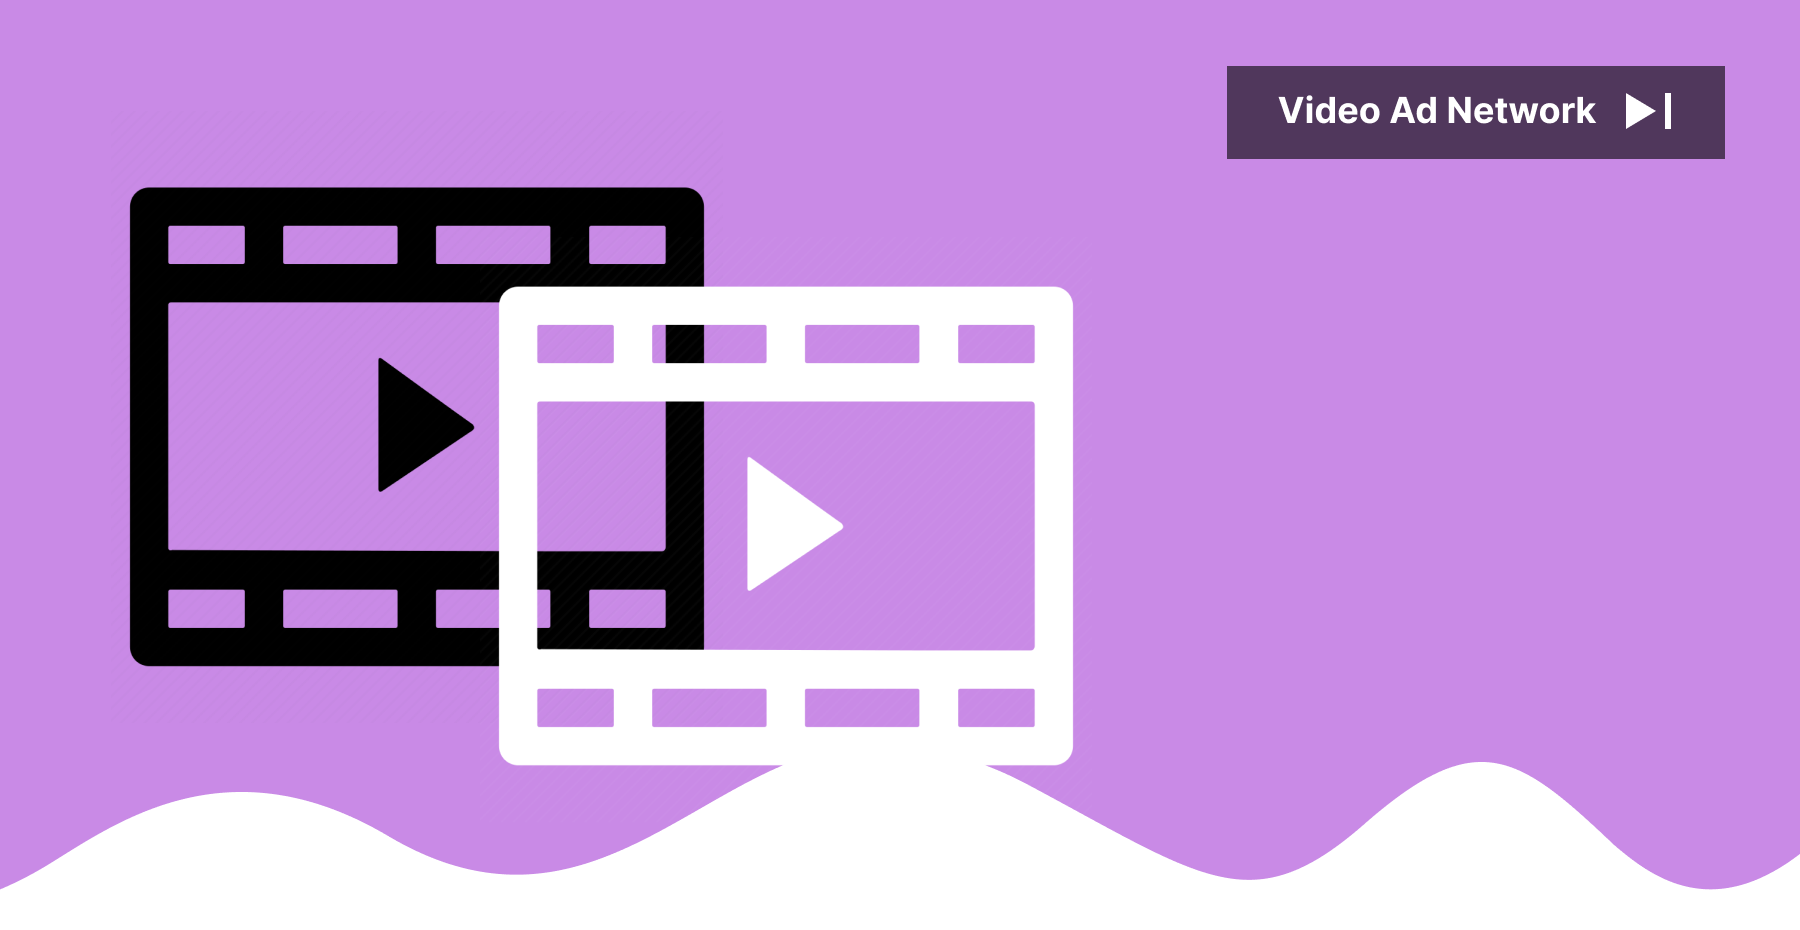 What is a Good Video Ad Network?